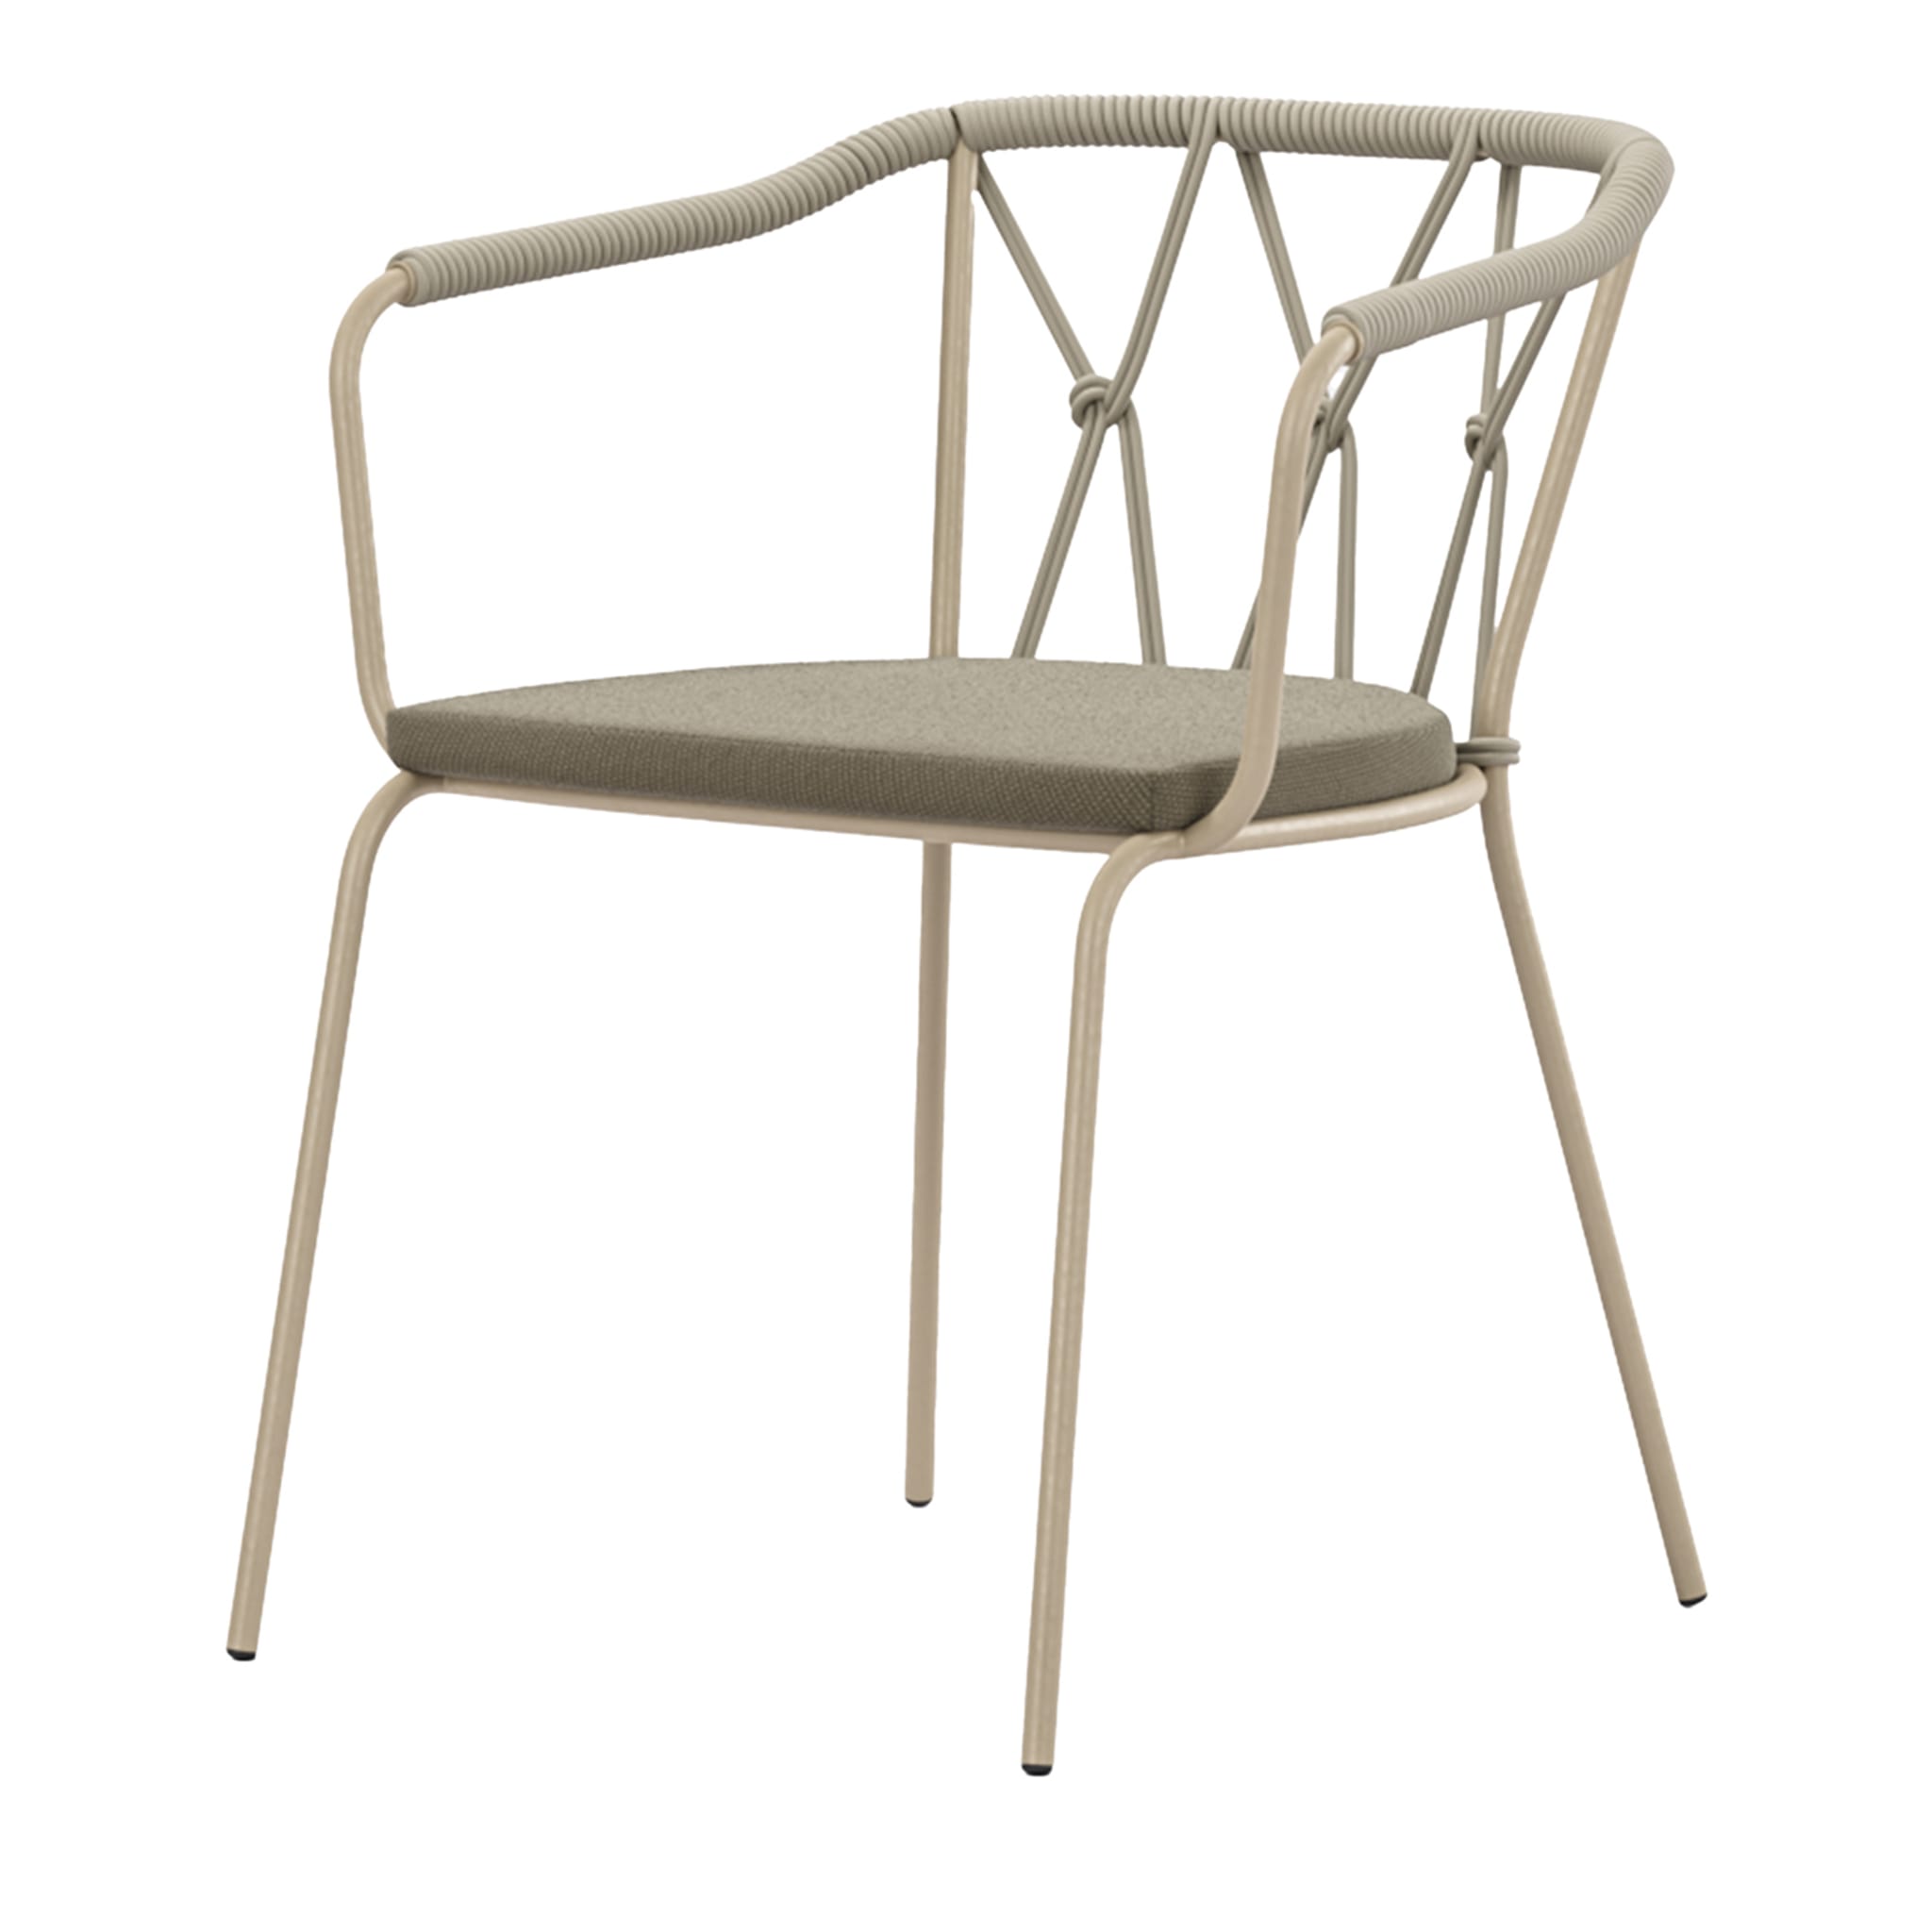 Scala Small Beige Outdoor Chair by Marco Piva - Vue principale